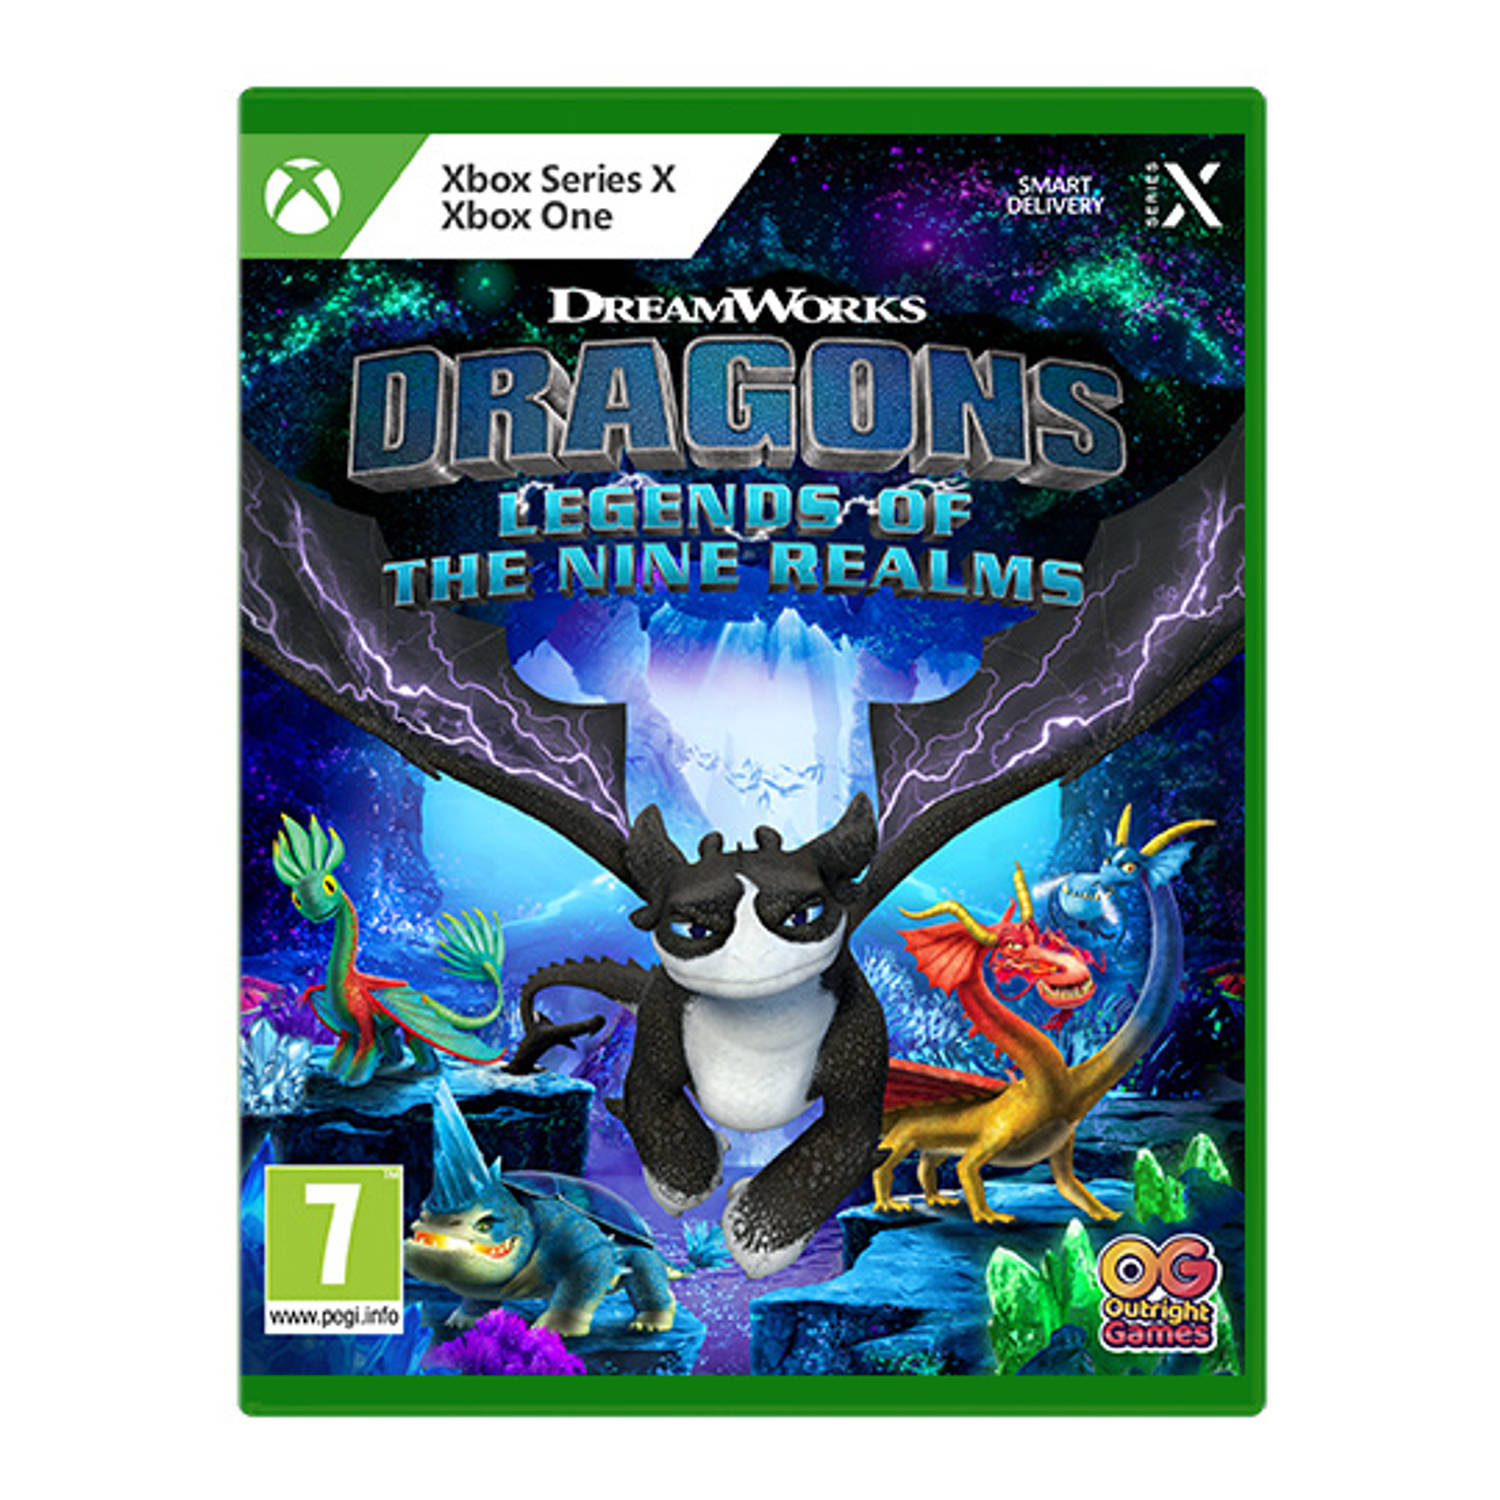 Dragons Legends of the Nine Realms. XBOXONE